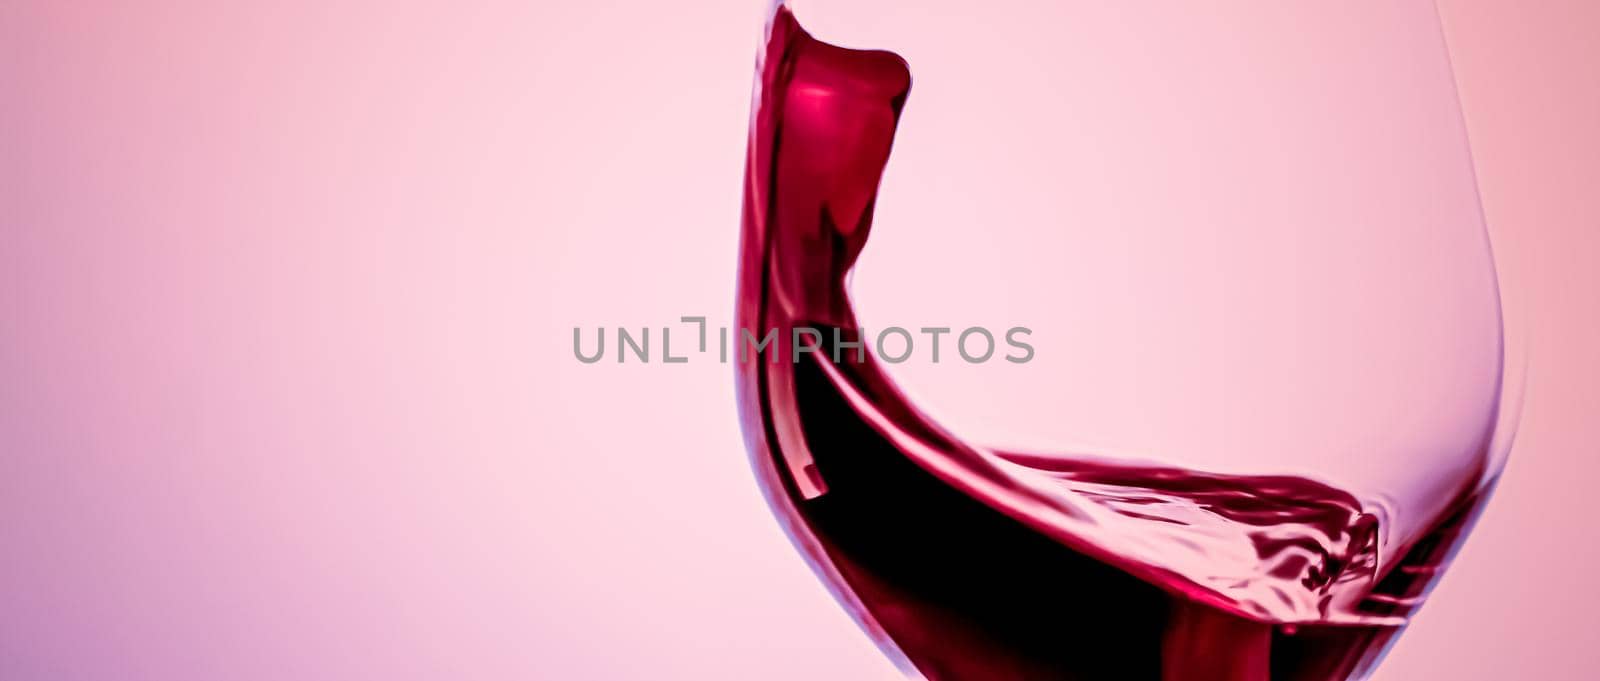 Premium red wine in crystal glass, alcohol drink and luxury aperitif, oenology and viticulture product by Anneleven